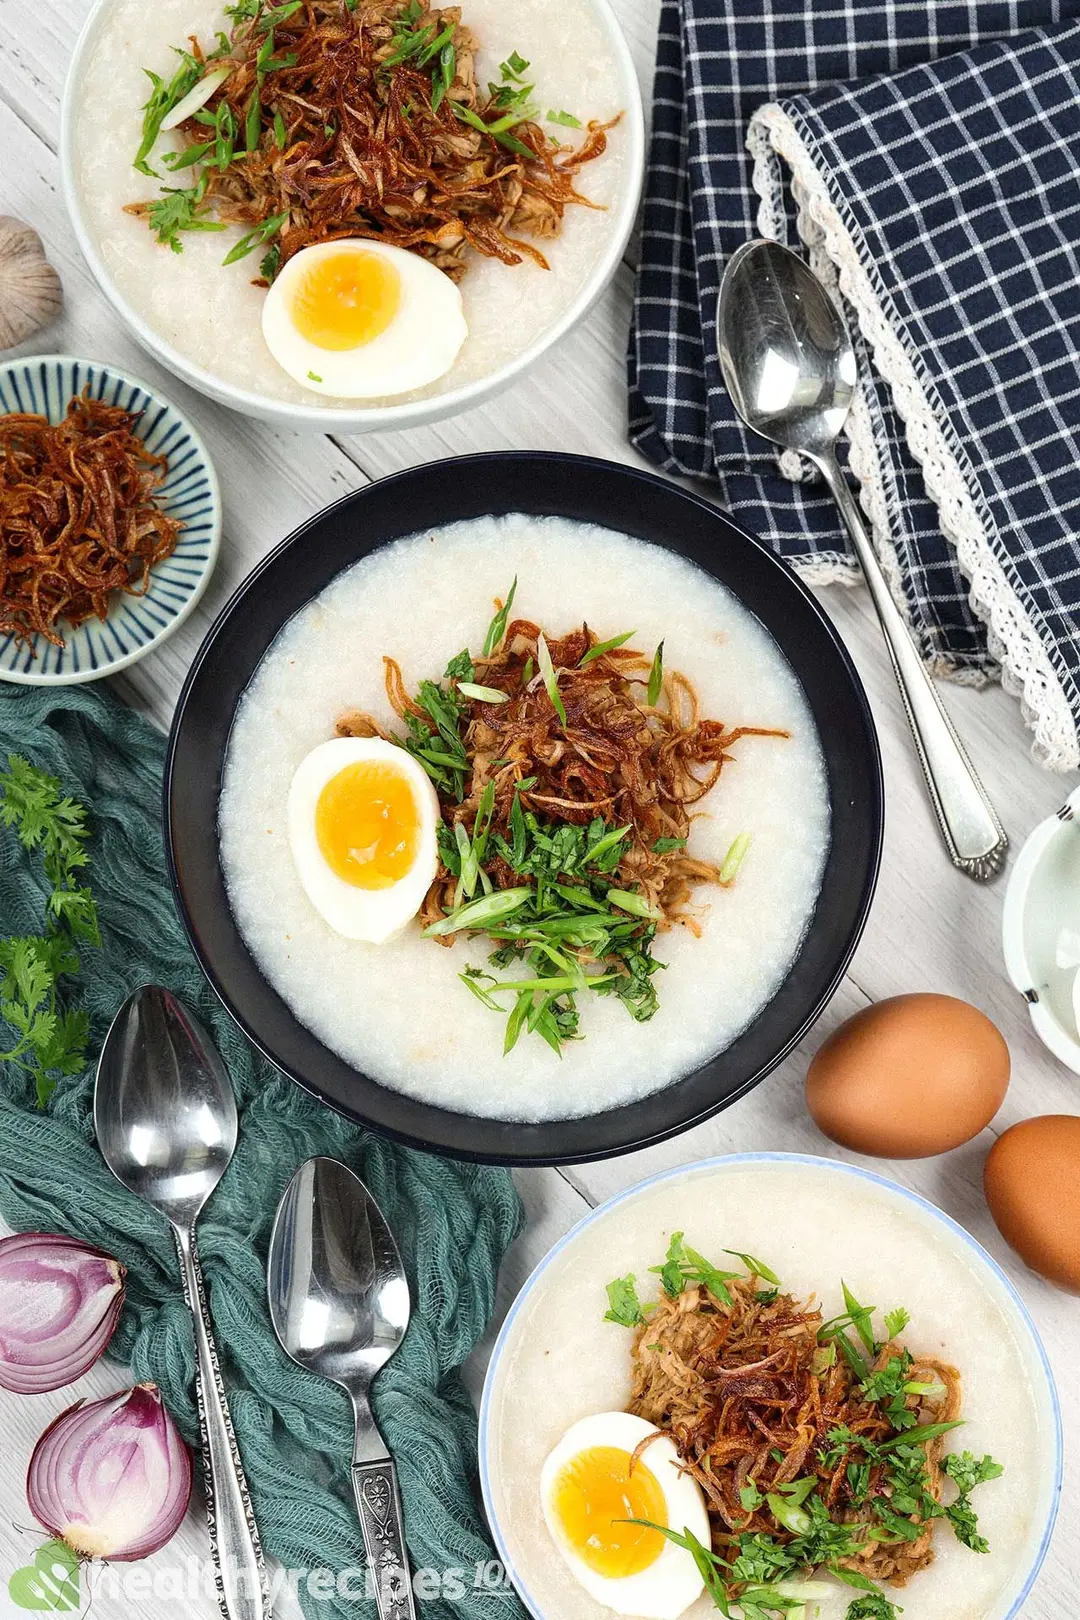 Three bowls of chicken congee alongside fried shallots and utensils